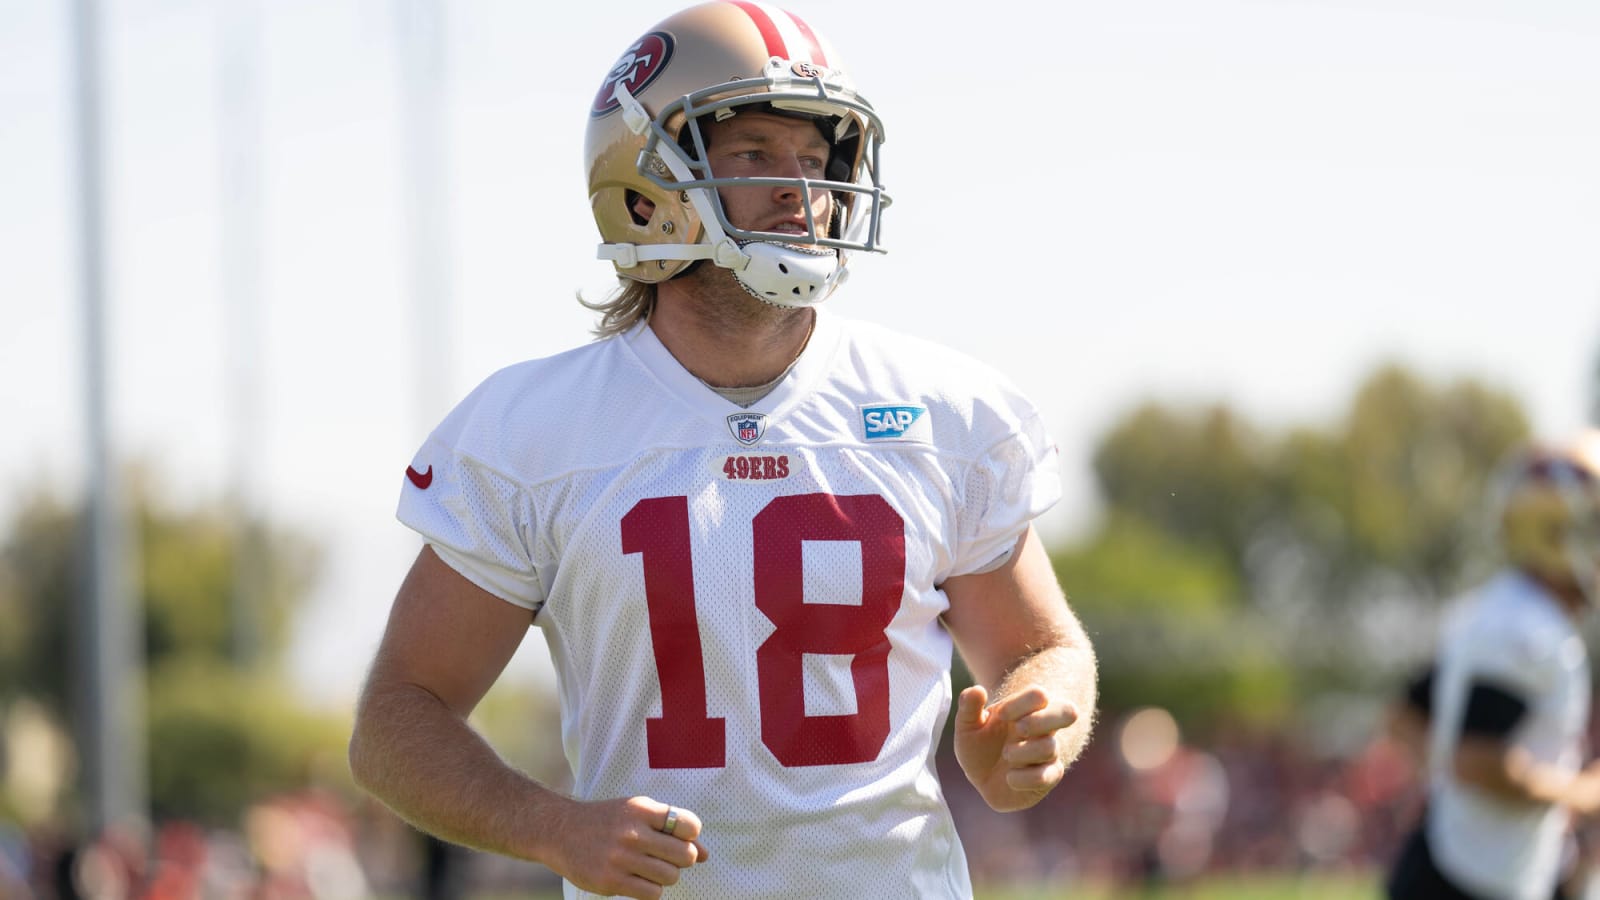 49ers punter Mitch Wishnowsky named NFC Special Teams Player of the Month